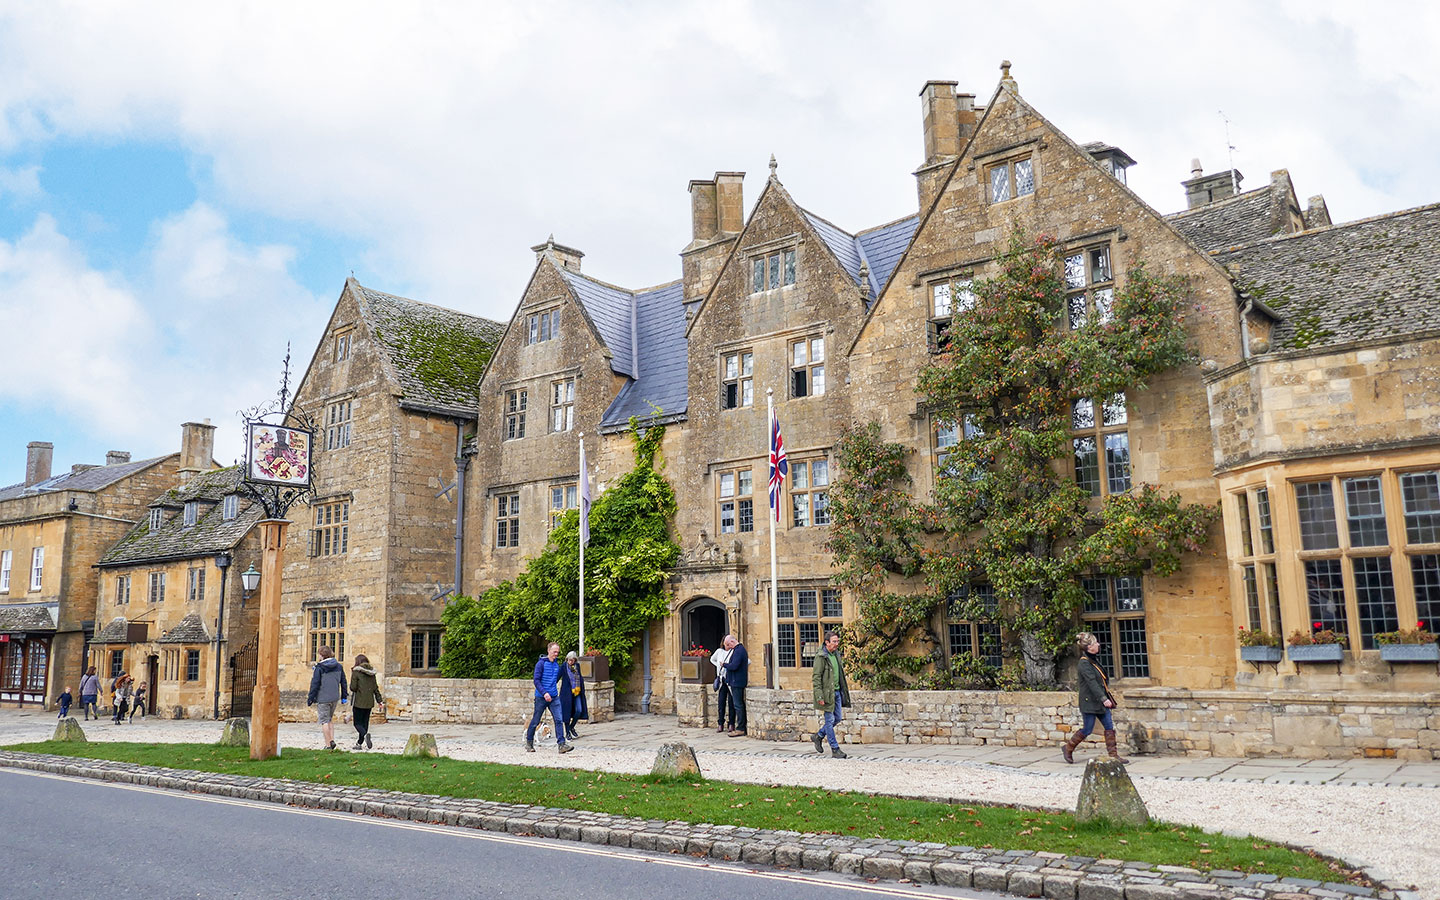 The Lygon Arms hotel in Broadway